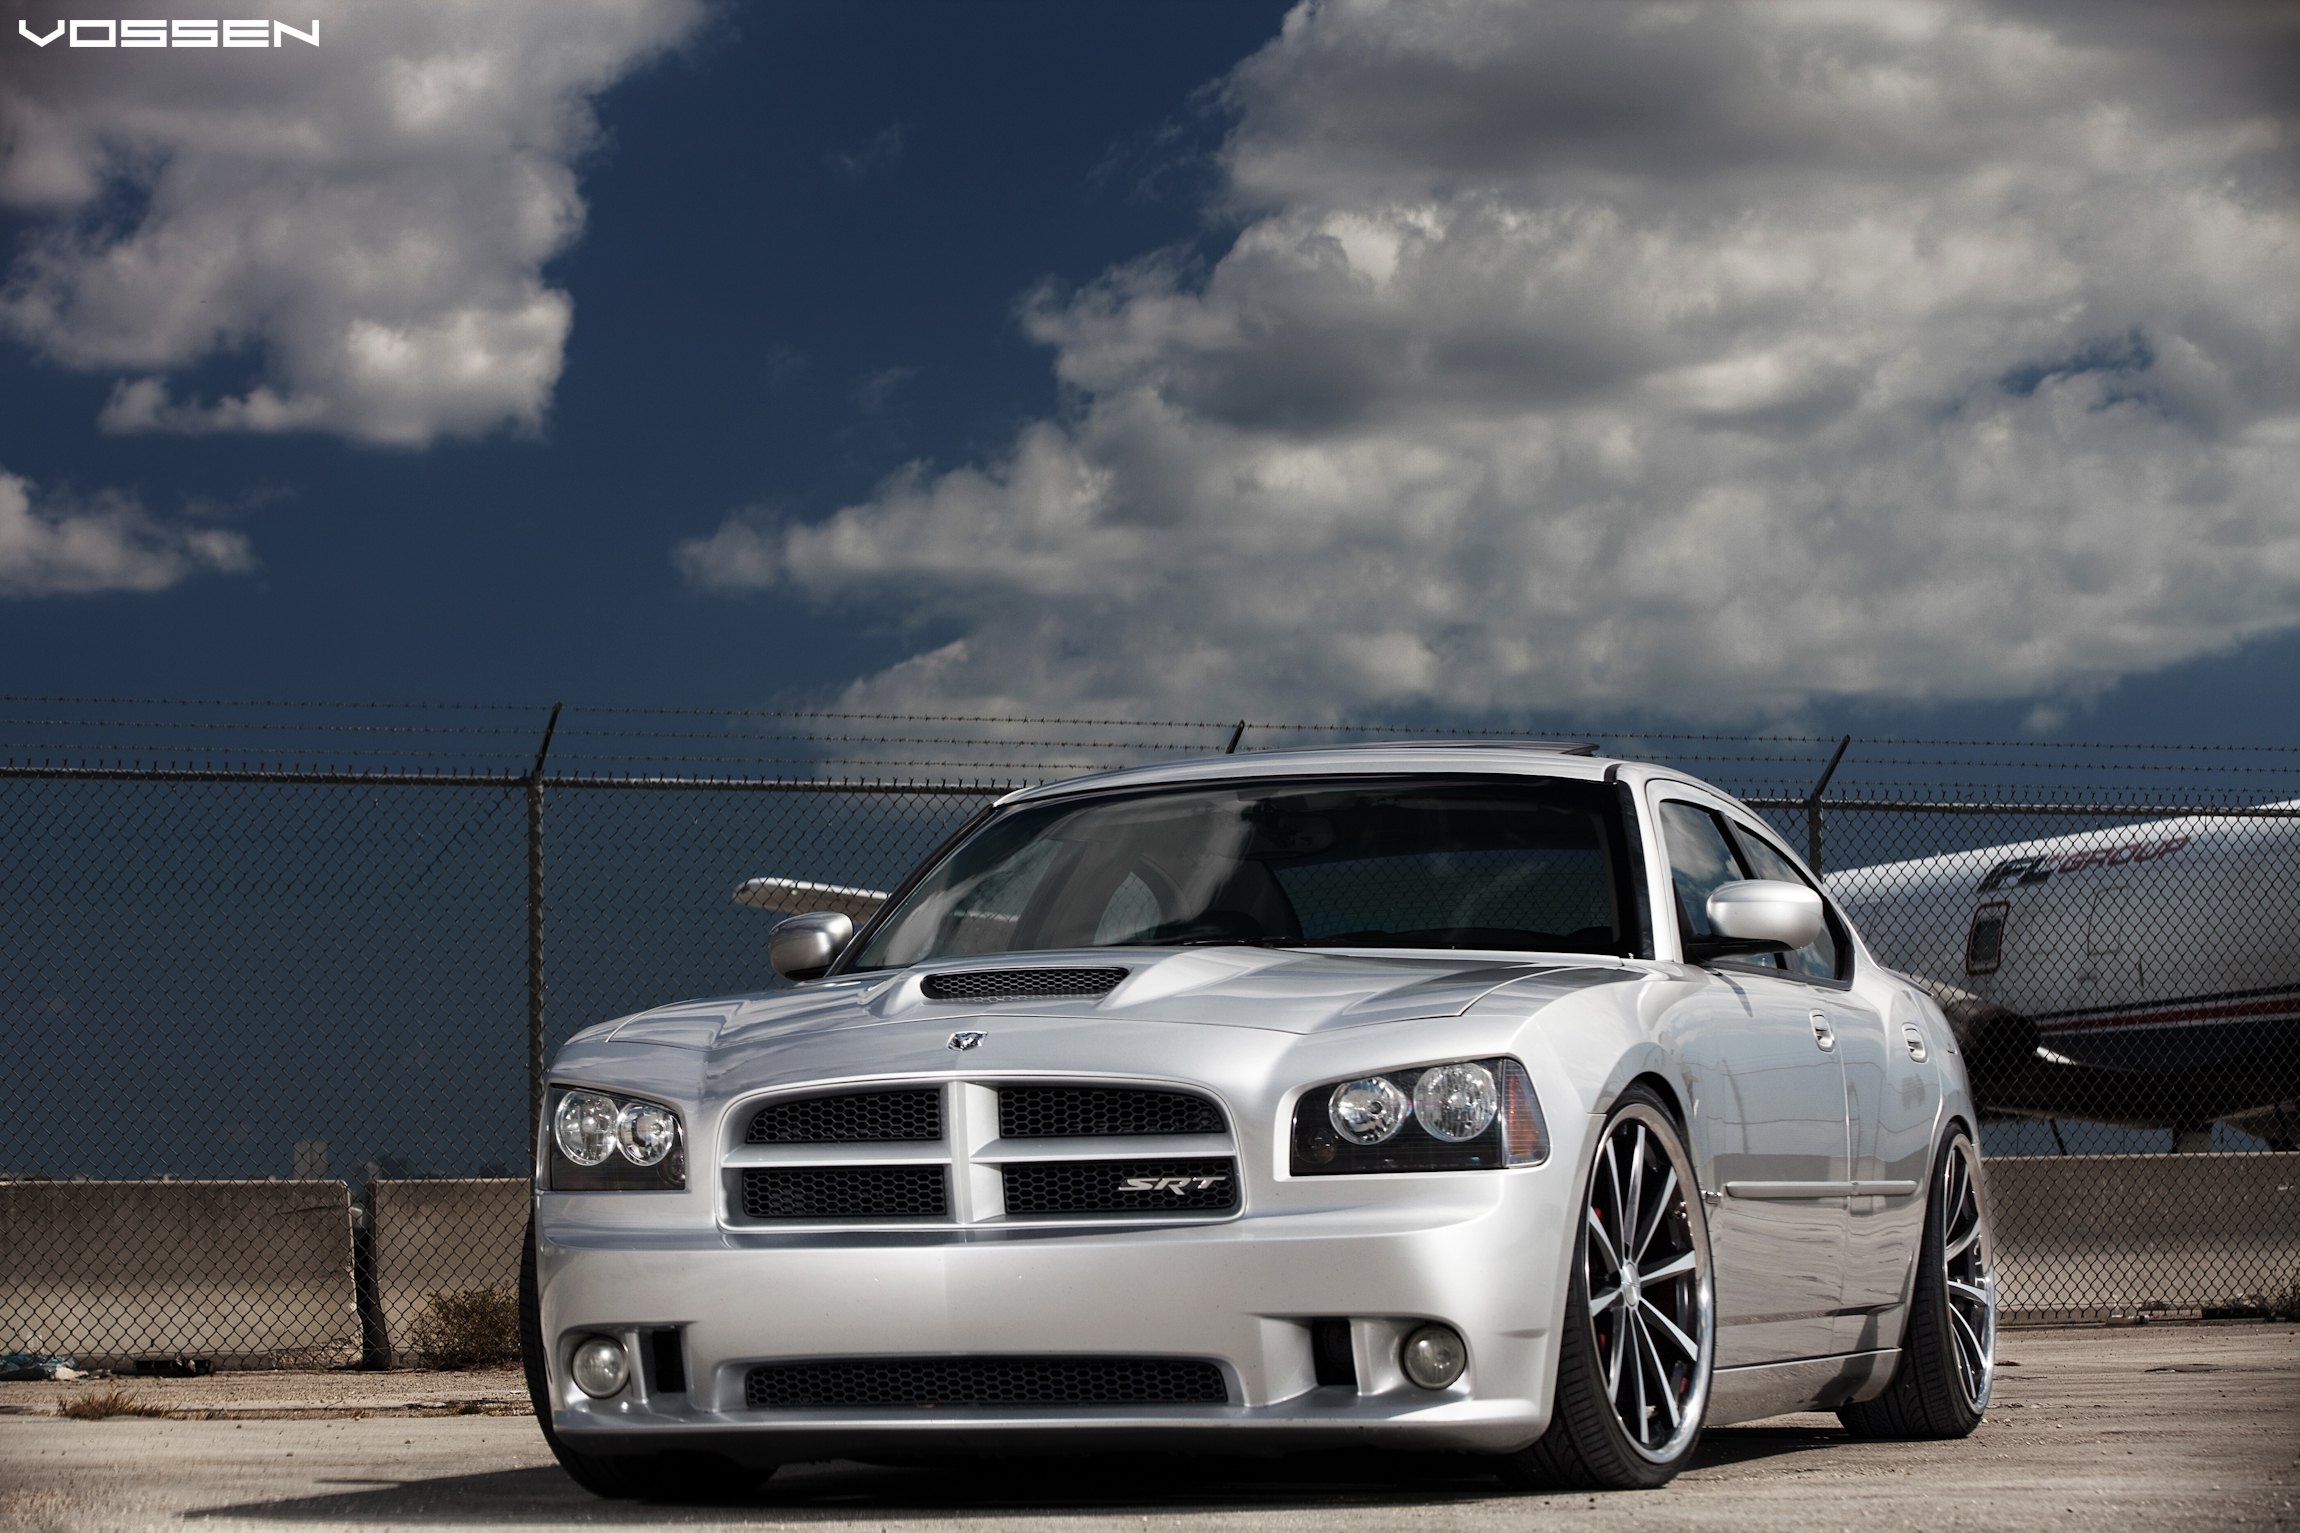 Silver Dodge Charger with Custom Mesh Grille - Photo by Vossen